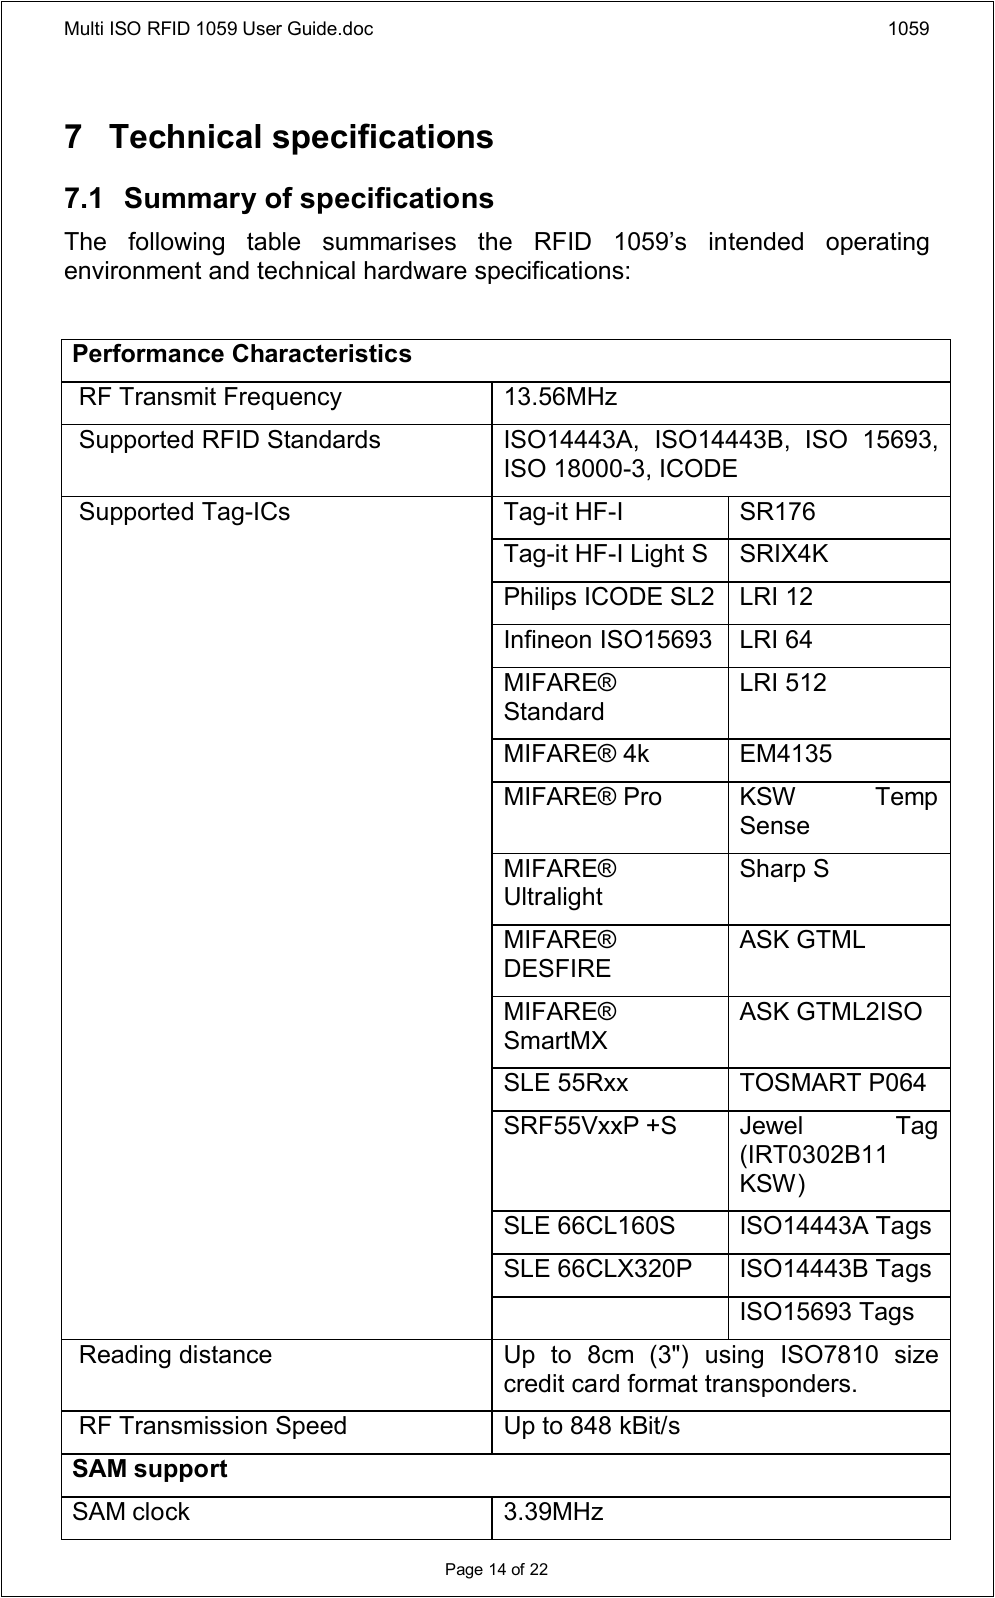 Multi ISO RFID 1059 User Guide.doc 1059Page 14 of 227 Technical specifications7.1 Summary of specificationsThe  following  table  summarises  the  RFID  1059’s  intended  operating environment and technical hardware specifications:Performance Characteristics RF Transmit Frequency   13.56MHz   Supported RFID Standards   ISO14443A,  ISO14443B,  ISO  15693, ISO 18000-3, ICODETag-it HF-I SR176  Tag-it HF-I Light S SRIX4K  Philips ICODE SL2 LRI 12Infineon ISO15693 LRI 64MIFARE® StandardLRI 512MIFARE® 4k   EM4135MIFARE® Pro   KSW  Temp SenseMIFARE® Ultralight  Sharp SMIFARE® DESFIRE  ASK GTMLMIFARE® SmartMX  ASK GTML2ISOSLE 55Rxx   TOSMART P064SRF55VxxP +S Jewel  Tag (IRT0302B11 KSW)SLE 66CL160S   ISO14443A Tags  SLE 66CLX320P   ISO14443B Tags   Supported Tag-ICs  ISO15693 Tags Reading distance   Up  to  8cm  (3&quot;)  using  ISO7810  size credit card format transponders. RF Transmission Speed   Up to 848 kBit/s  SAM supportSAM clock 3.39MHz